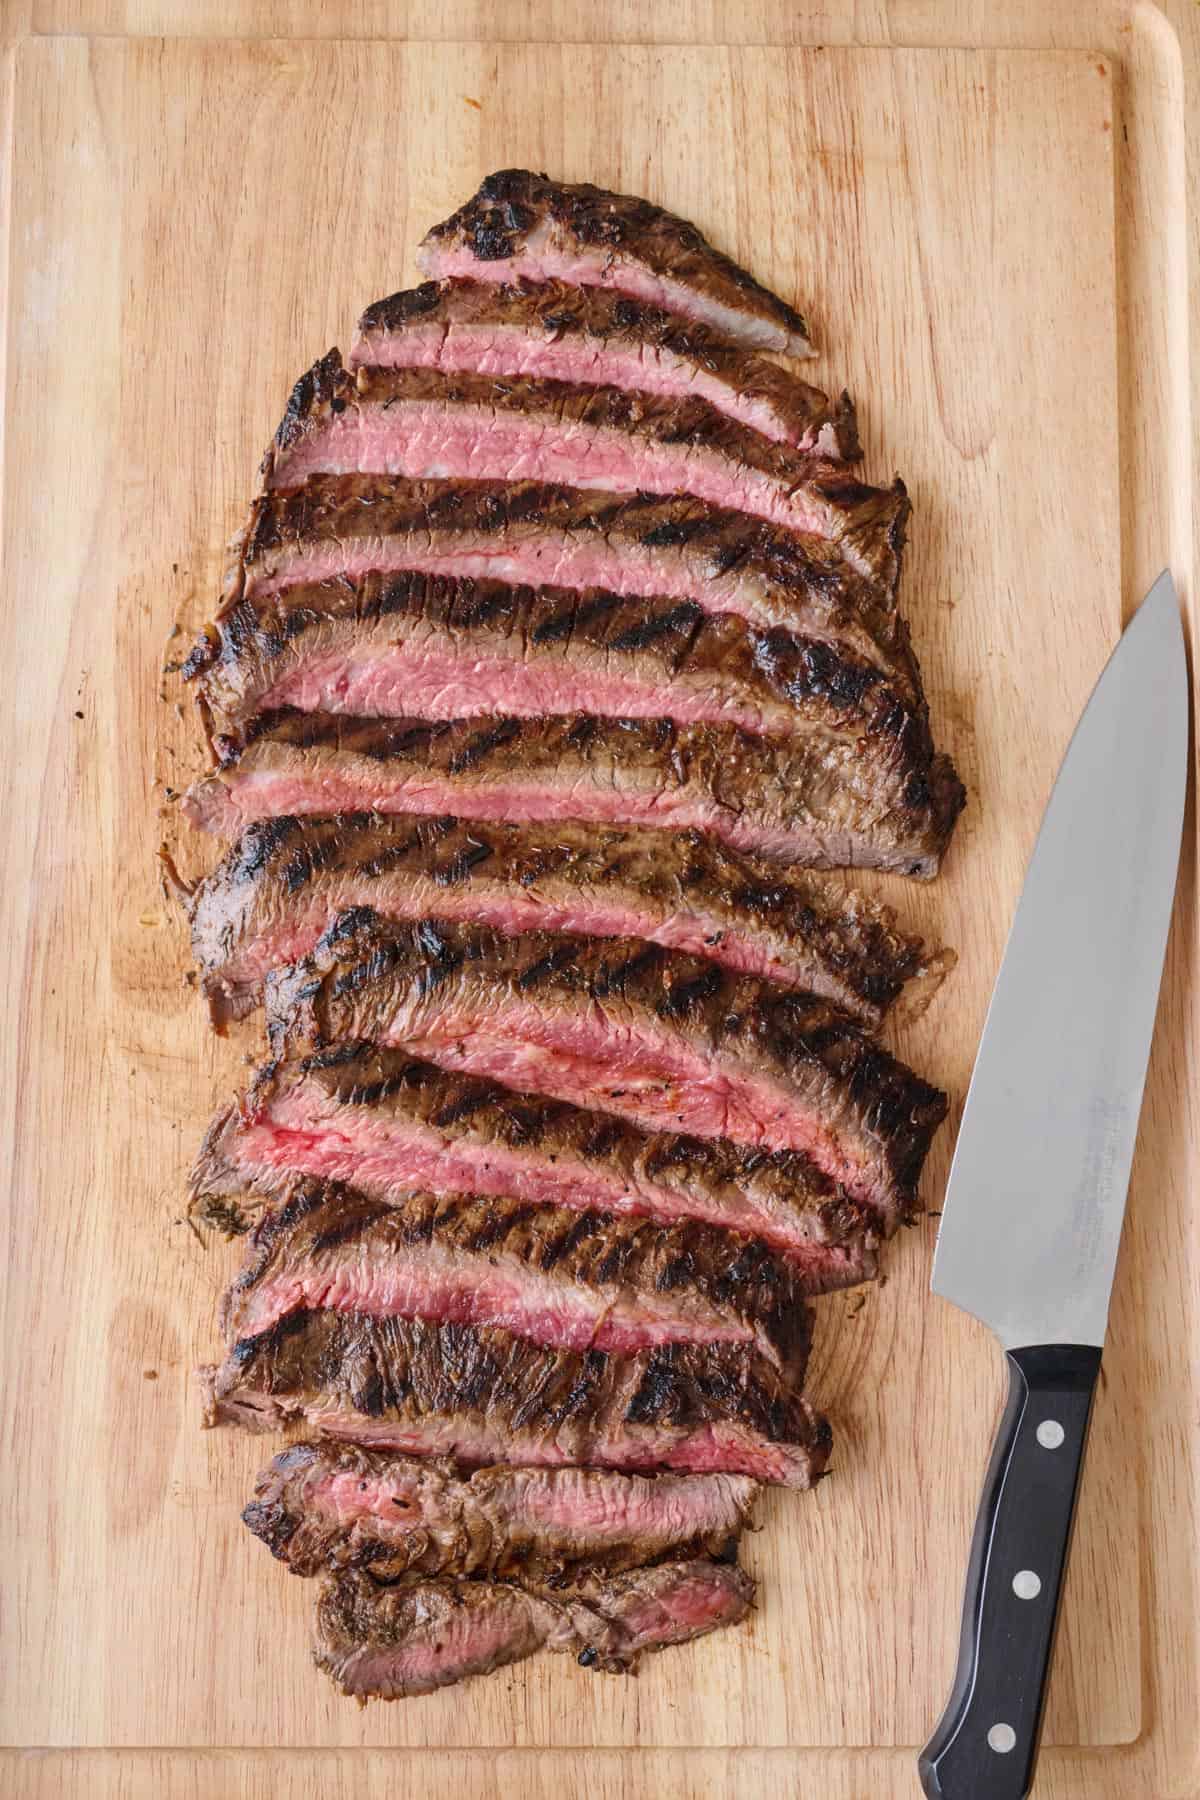 Flank steak on a cutting board after grilling and cut into thick slices.